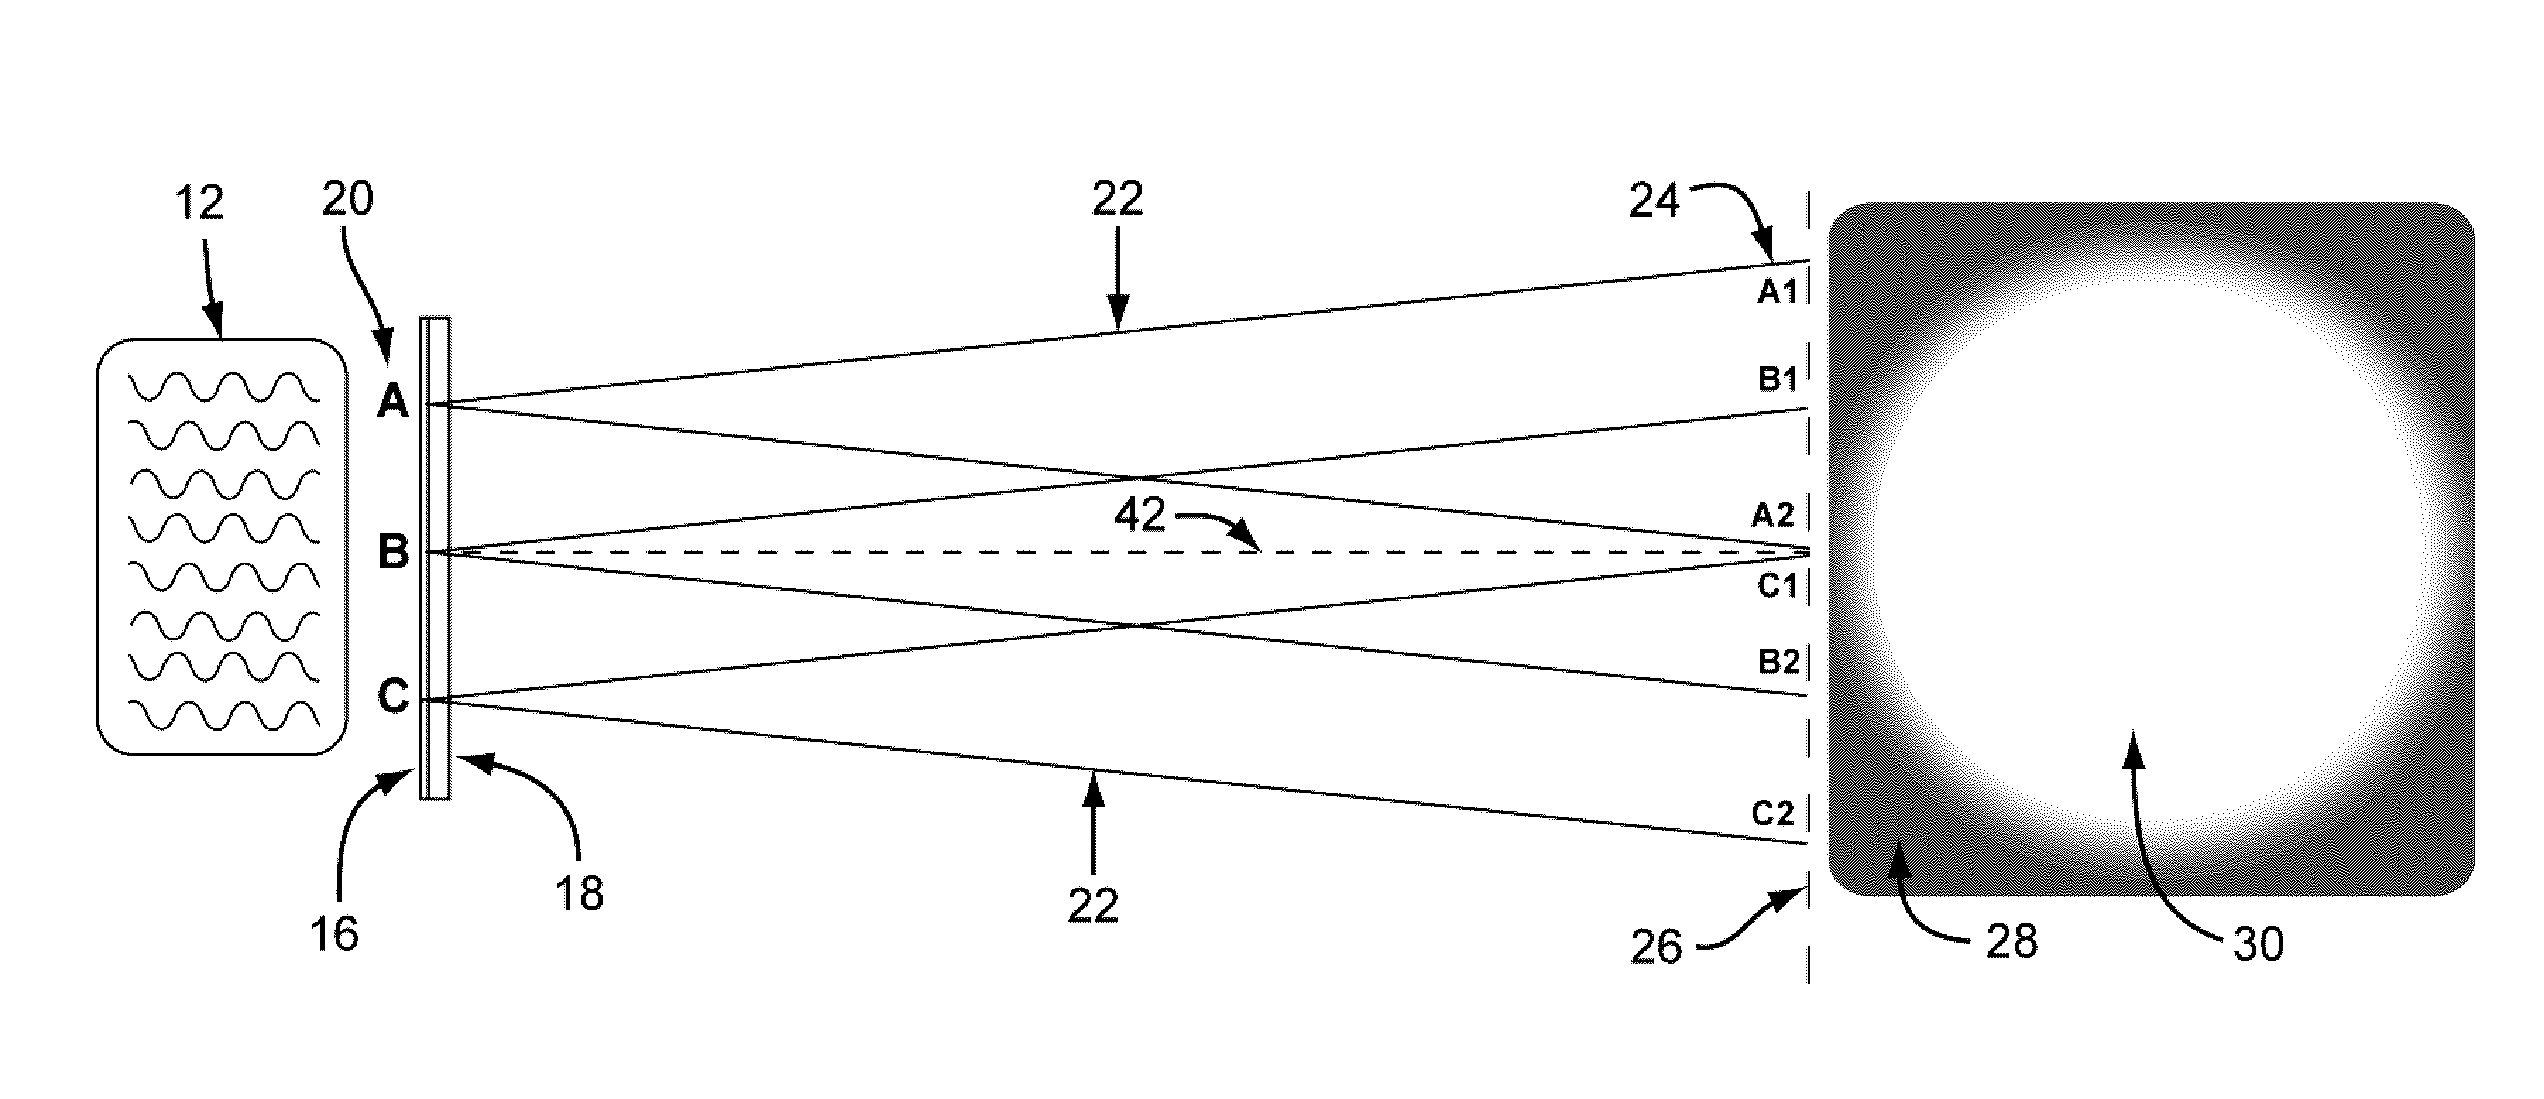 Anti-speckle system for coherent illumination system